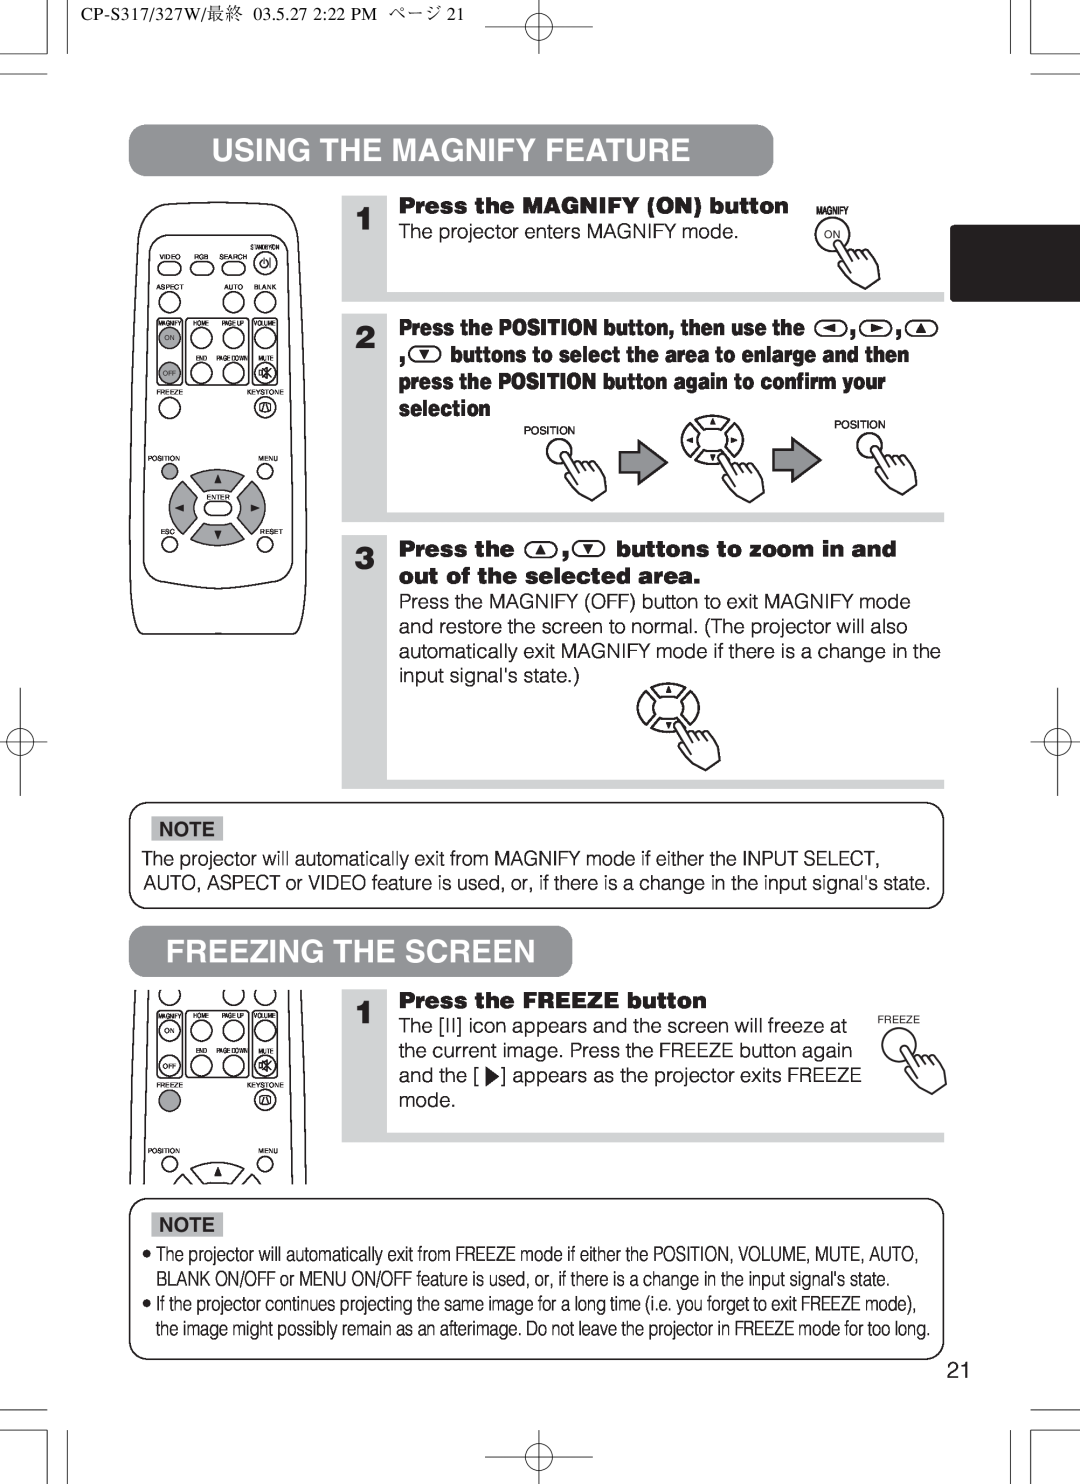 Hitachi cp-s318 user manual Using The Magnify Feature, Freezing The Screen, Press the MAGNIFY ON button, selection 